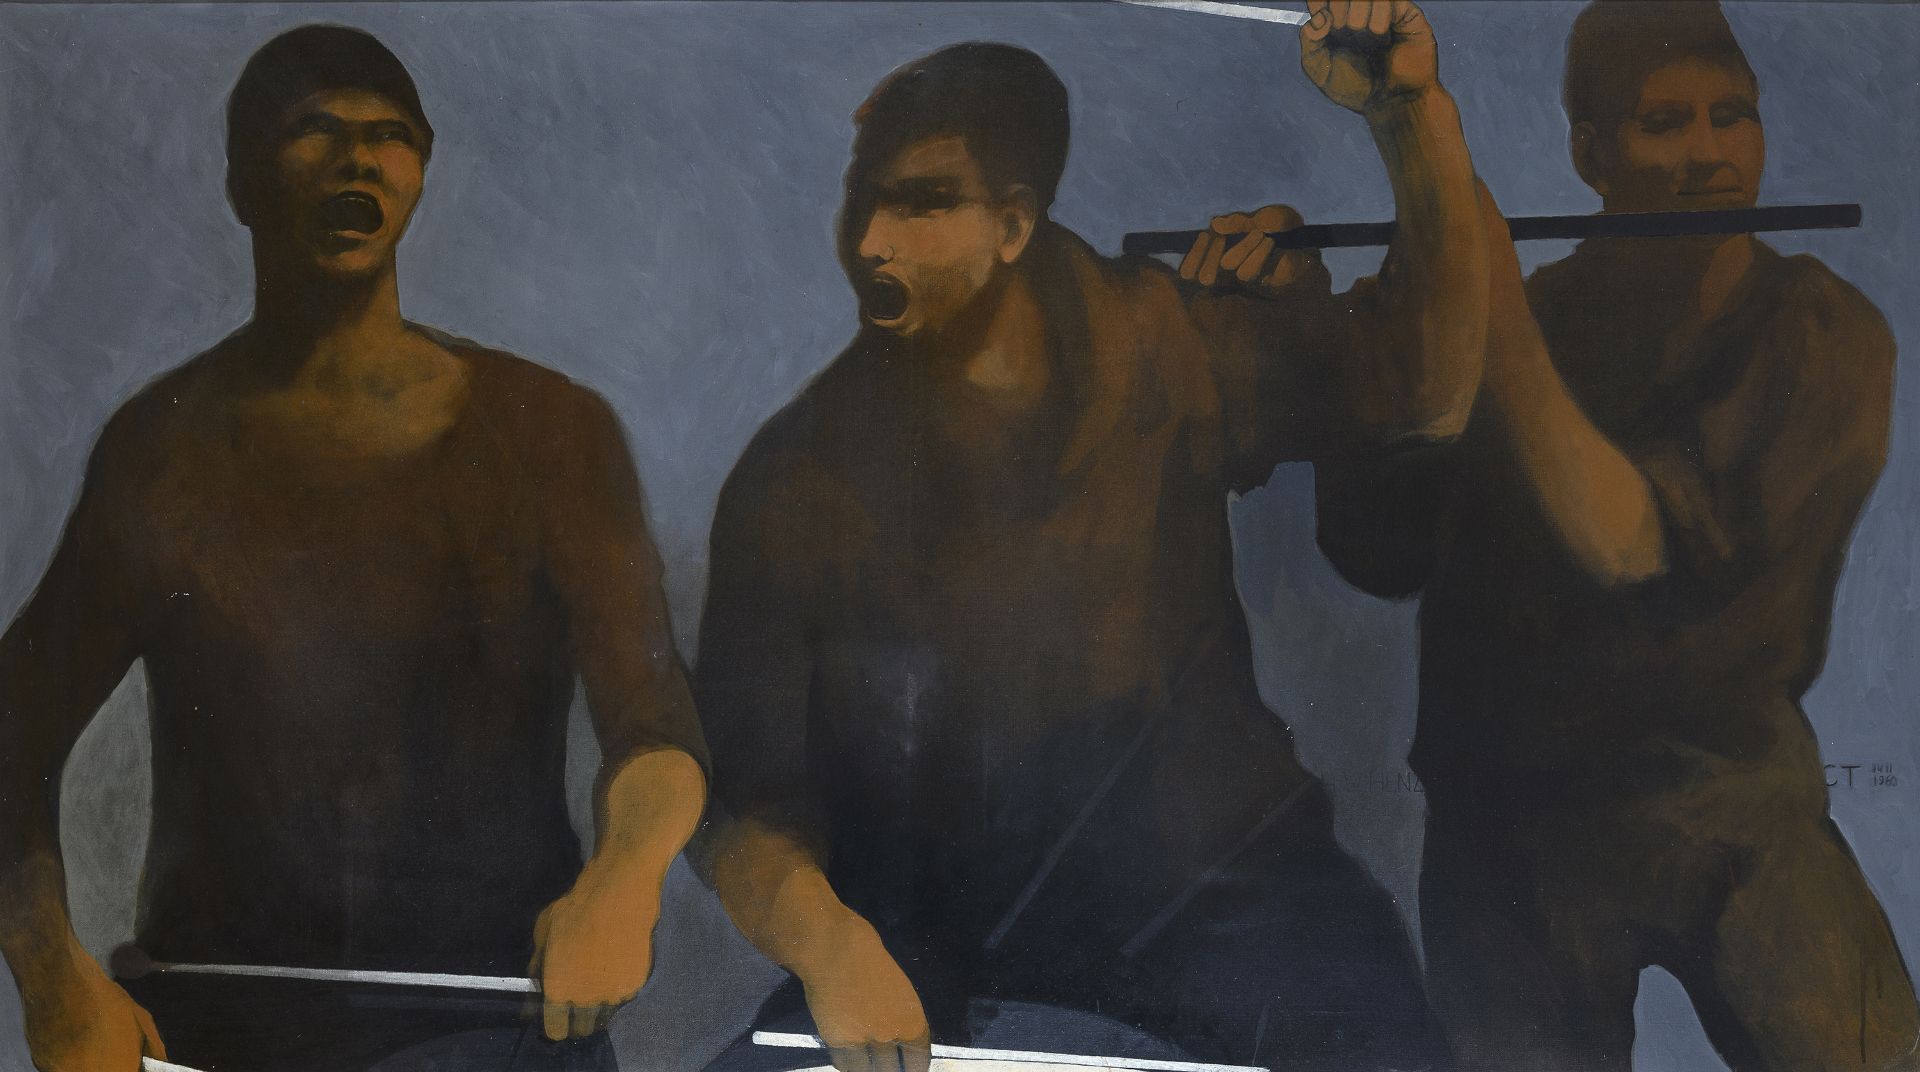 OIL PAINTING MUSICIANS BY CARL TIMNER 1960